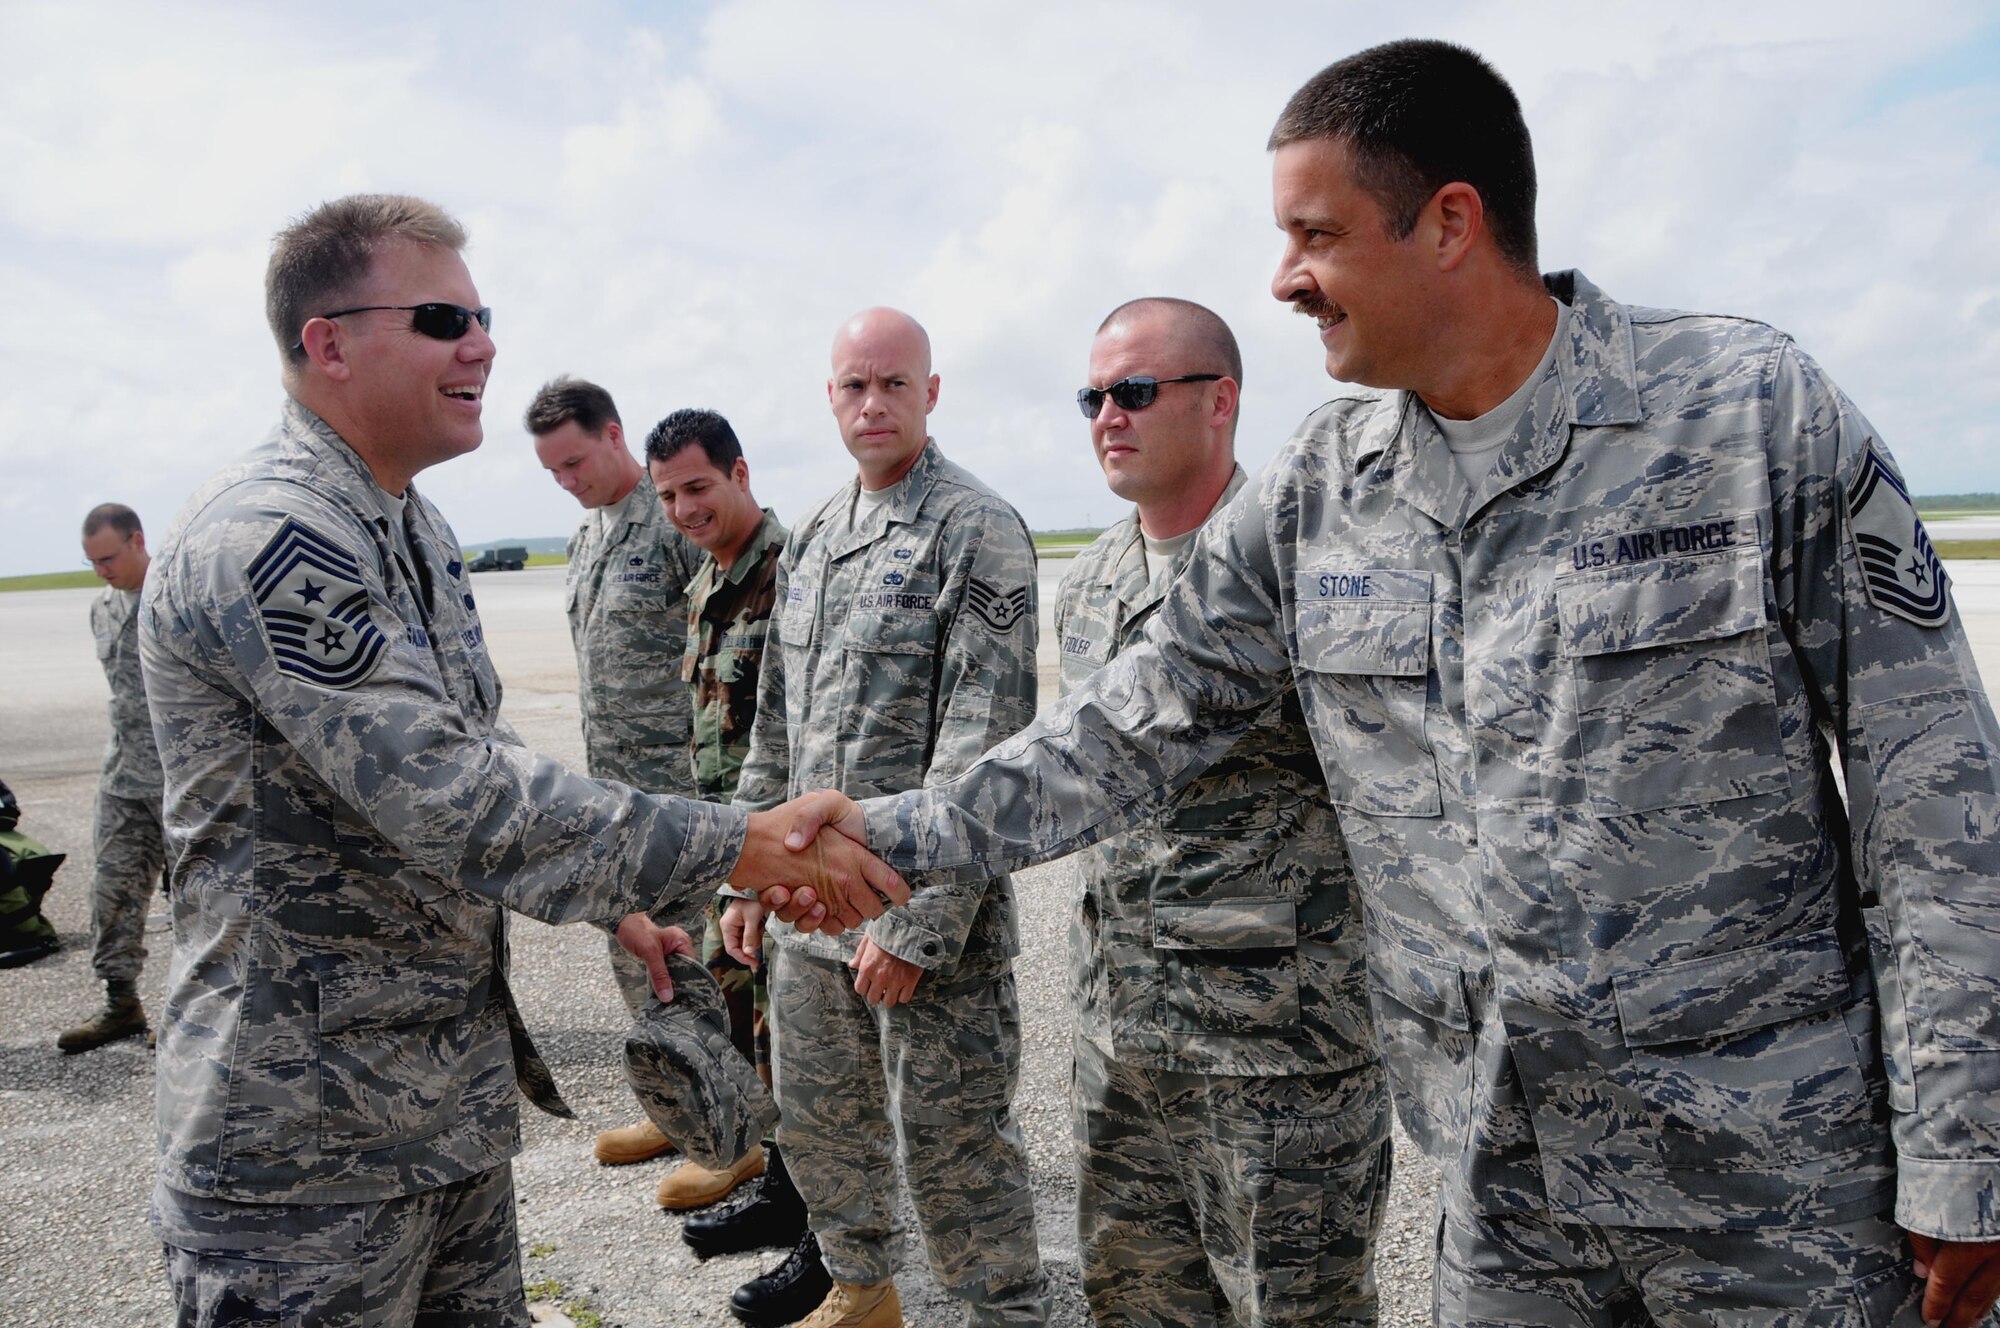 ANDERSEN AIR FORCE BASE, Guam - Thirteenth Air Force Command Chief Master Sgt. Todd Salzman greets Senior Master Sgt. Stone and other Airmen from 36th Mobility Response Squadron here Oct. 17 before receiving a briefing on the unit’s capabilities. The 36th MRS trains, organizes, equips and leads cross-functional forces providing initial Air Force presence to potentially austere forward operation locations as directed by the Pacific Air Forces commander. (U.S. Air Force photo by Airman 1st Class Courtney Witt)